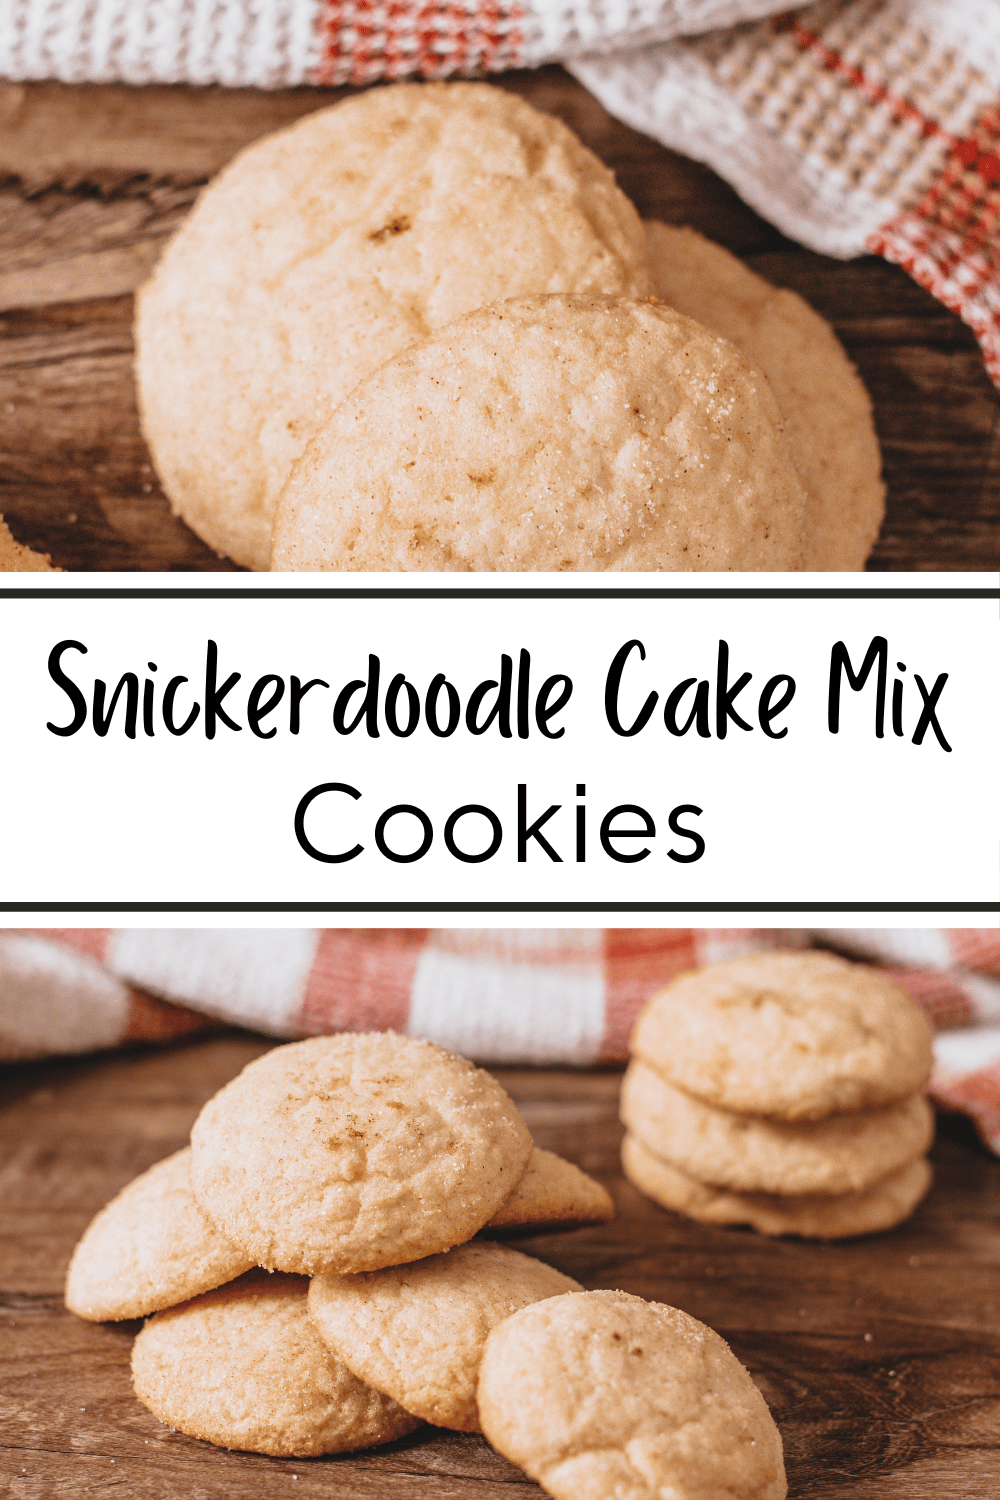 Snickerdoodle Cake Mix Cookies are soft and chewy for an easy and delicious treat. Using cake mix makes it a quick and effortless dessert. #snickerdoodlecakemixcookies #snickerdoodles #cakemixcookies #cookies #snickerdoodlecookies via @wondermomwannab